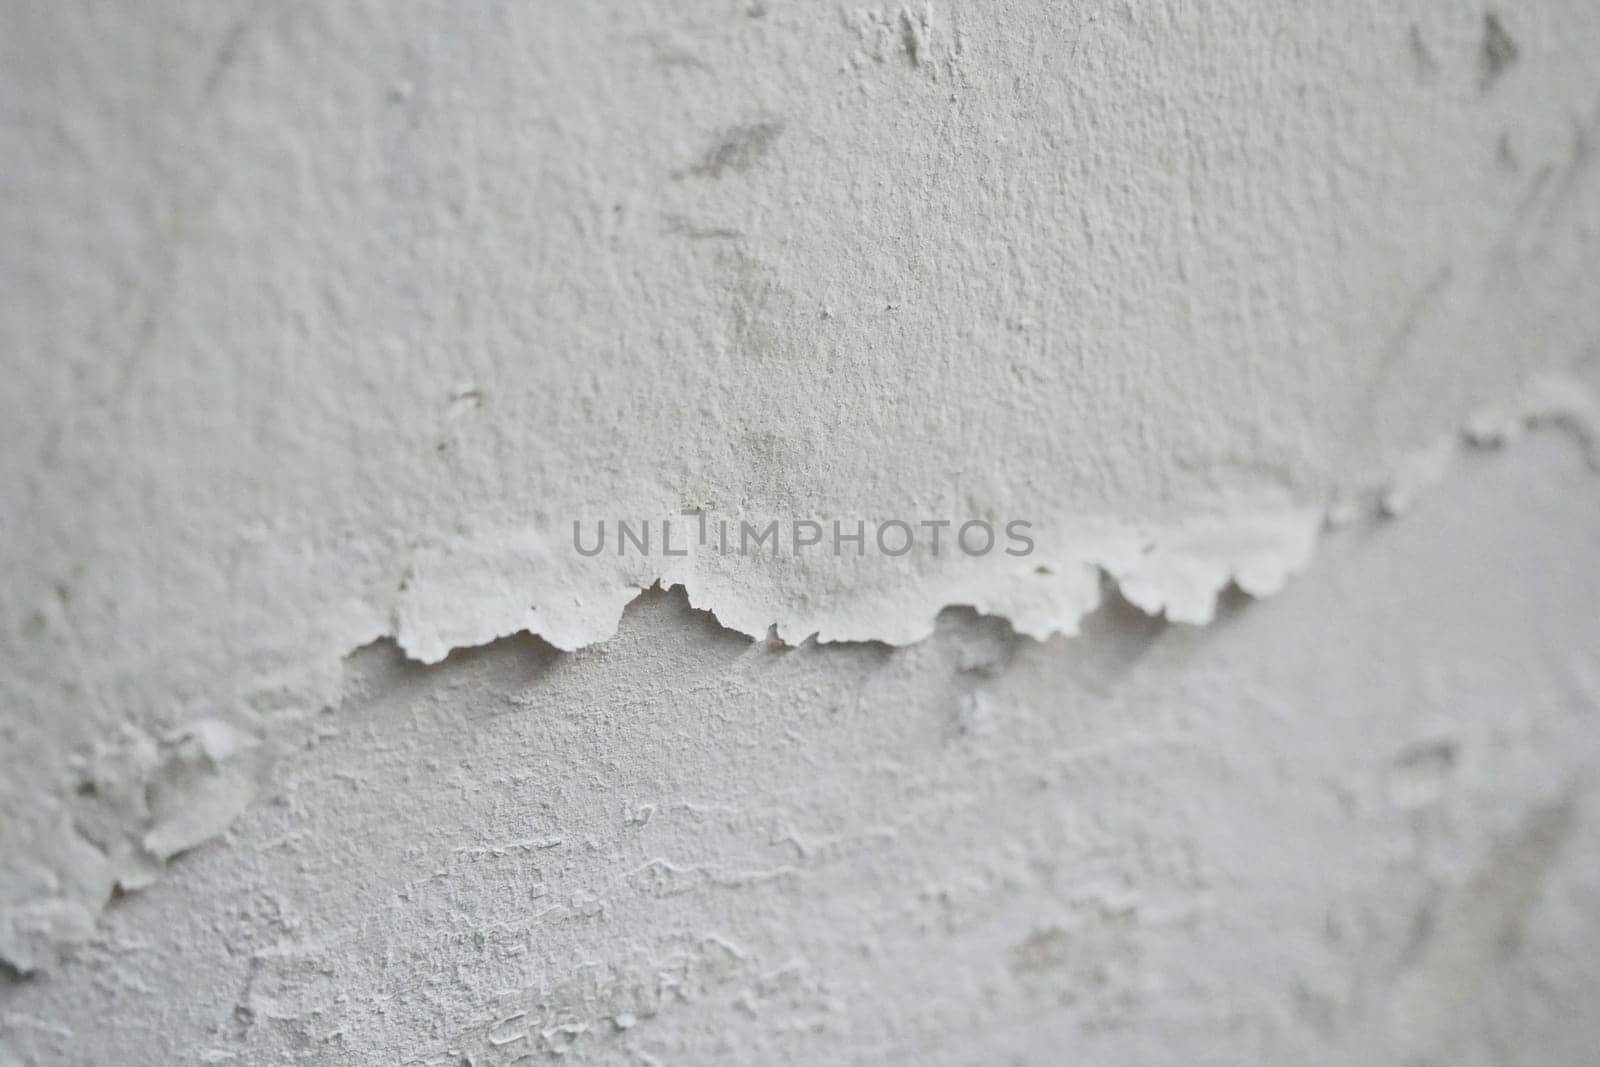 Paint swelling on the wall due to moisture, damp wall samples, damp wall and damage to the paint, by nhatipoglu